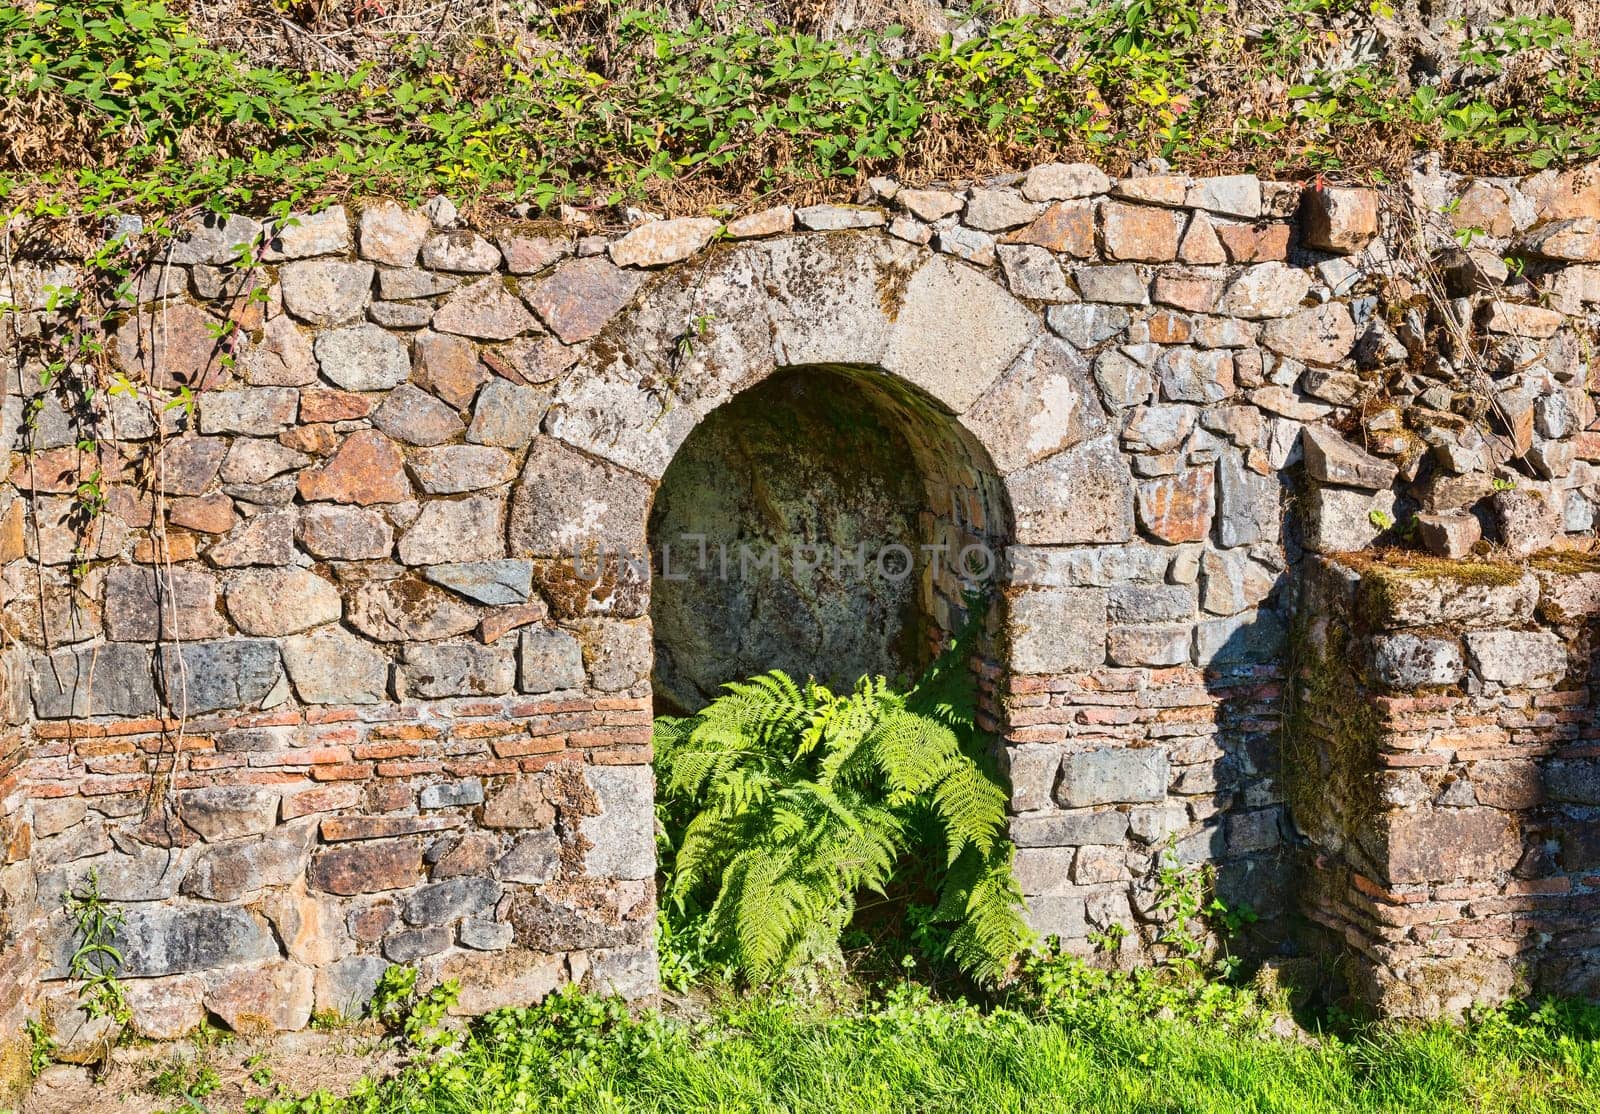 a beautiful green fern in an old stone wall archaeological excavation in France by compuinfoto